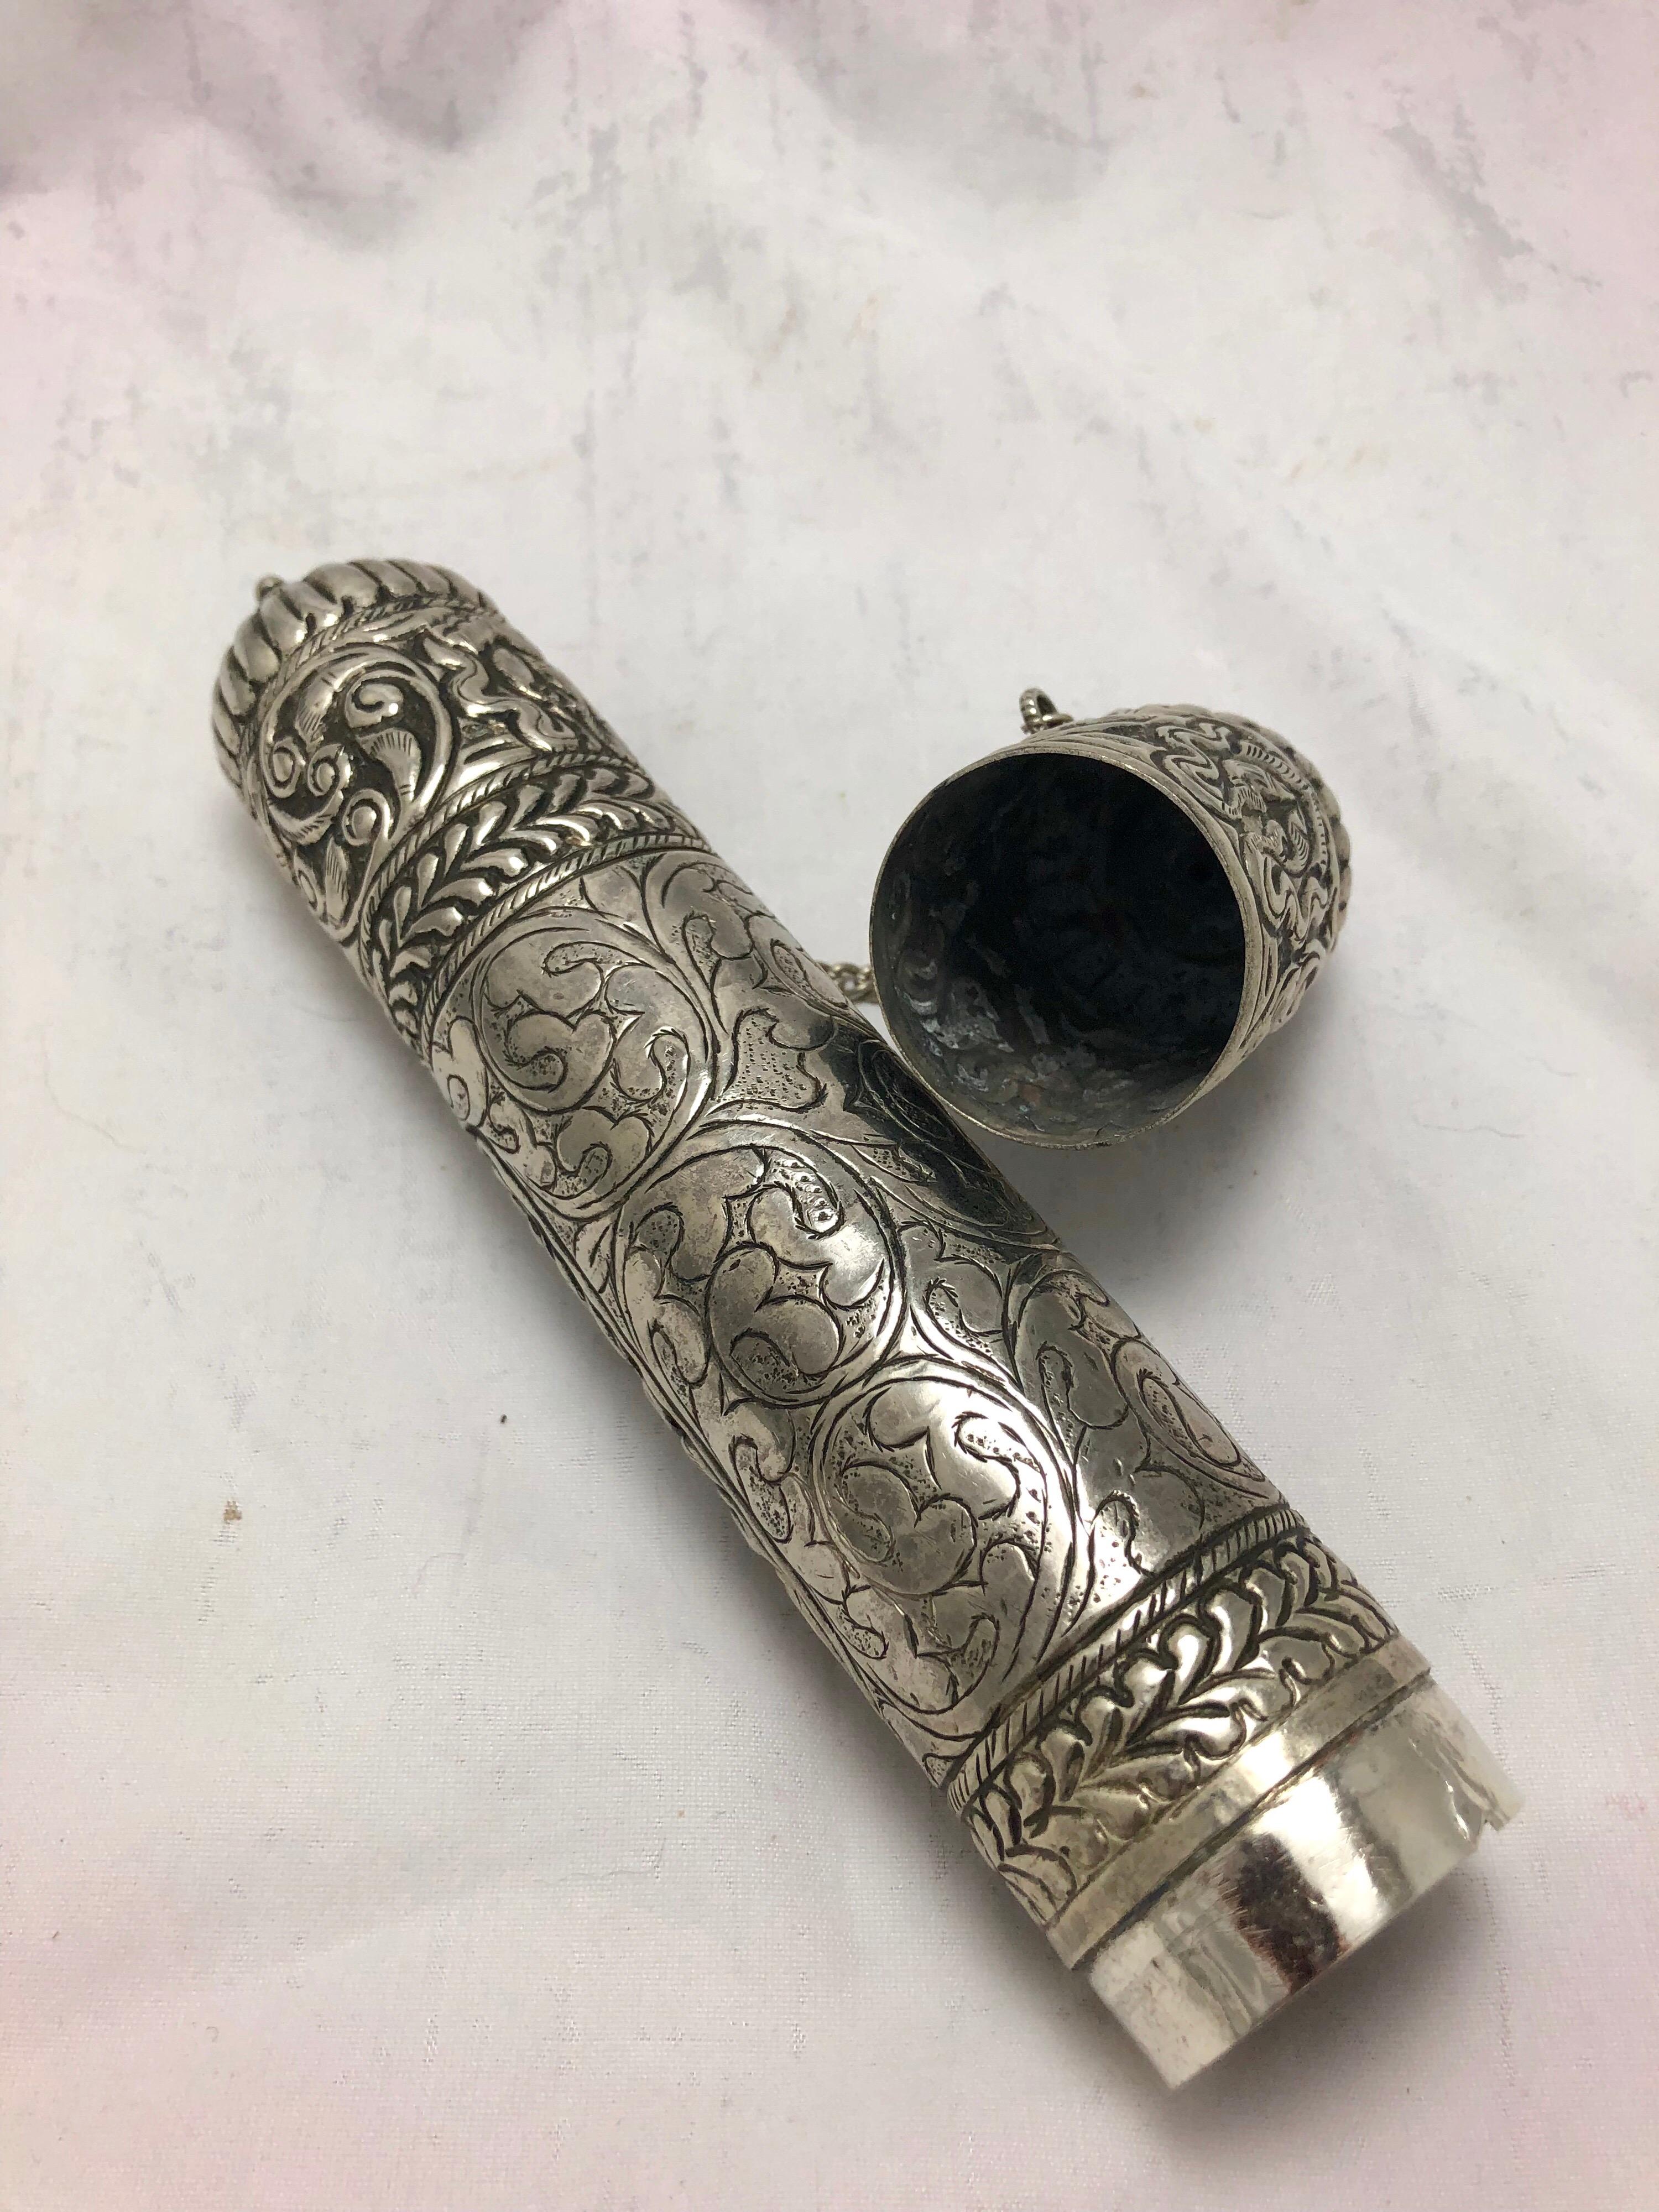 Etched Mid-19th Century Ornate Silver Scroll Holder, Moroccan Jewish Judaica Antique For Sale